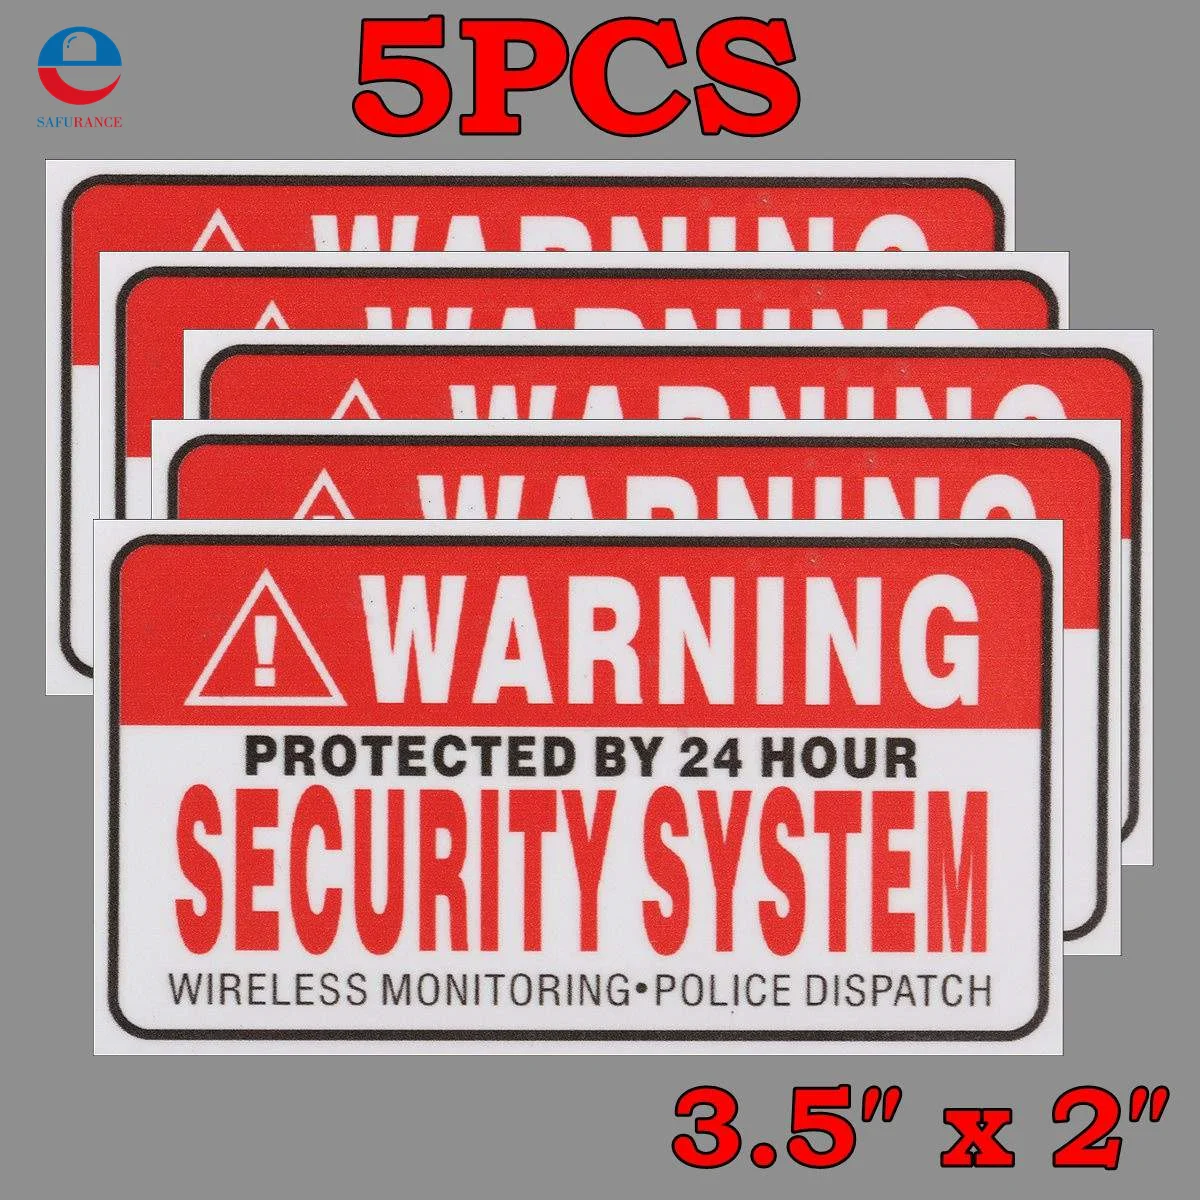 LOT 9 HOME PARTY STORE SECURITY SYSTEM ALARM IN USE DECAL WARNING STICKER SIGNS 